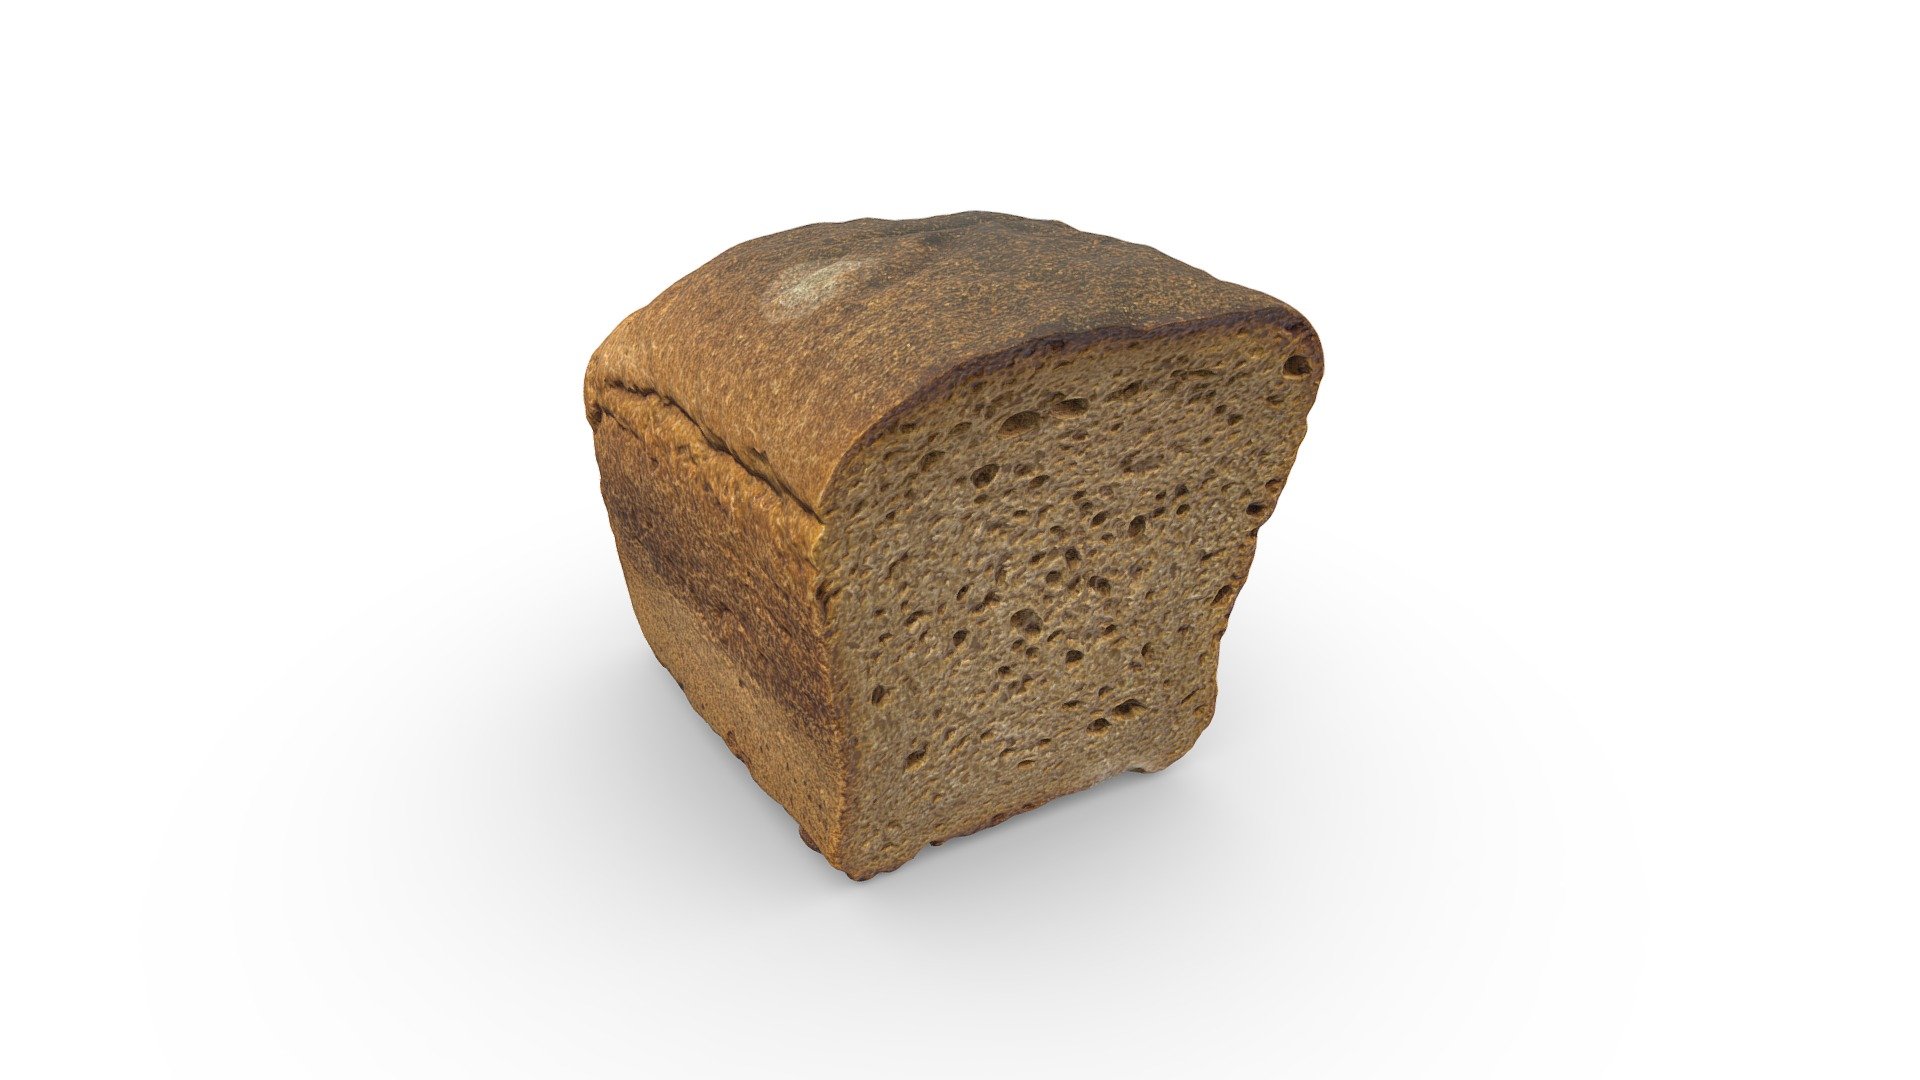 High-poly bread with mold photogrammetry scan. PBR texture maps 4096x4096 px. resolution for metallic or specular workflow. Scan from real food, high-poly 3D model, 4K resolution textures.

Additional file contains low-poly 3d model version, game-ready in real time 3d model